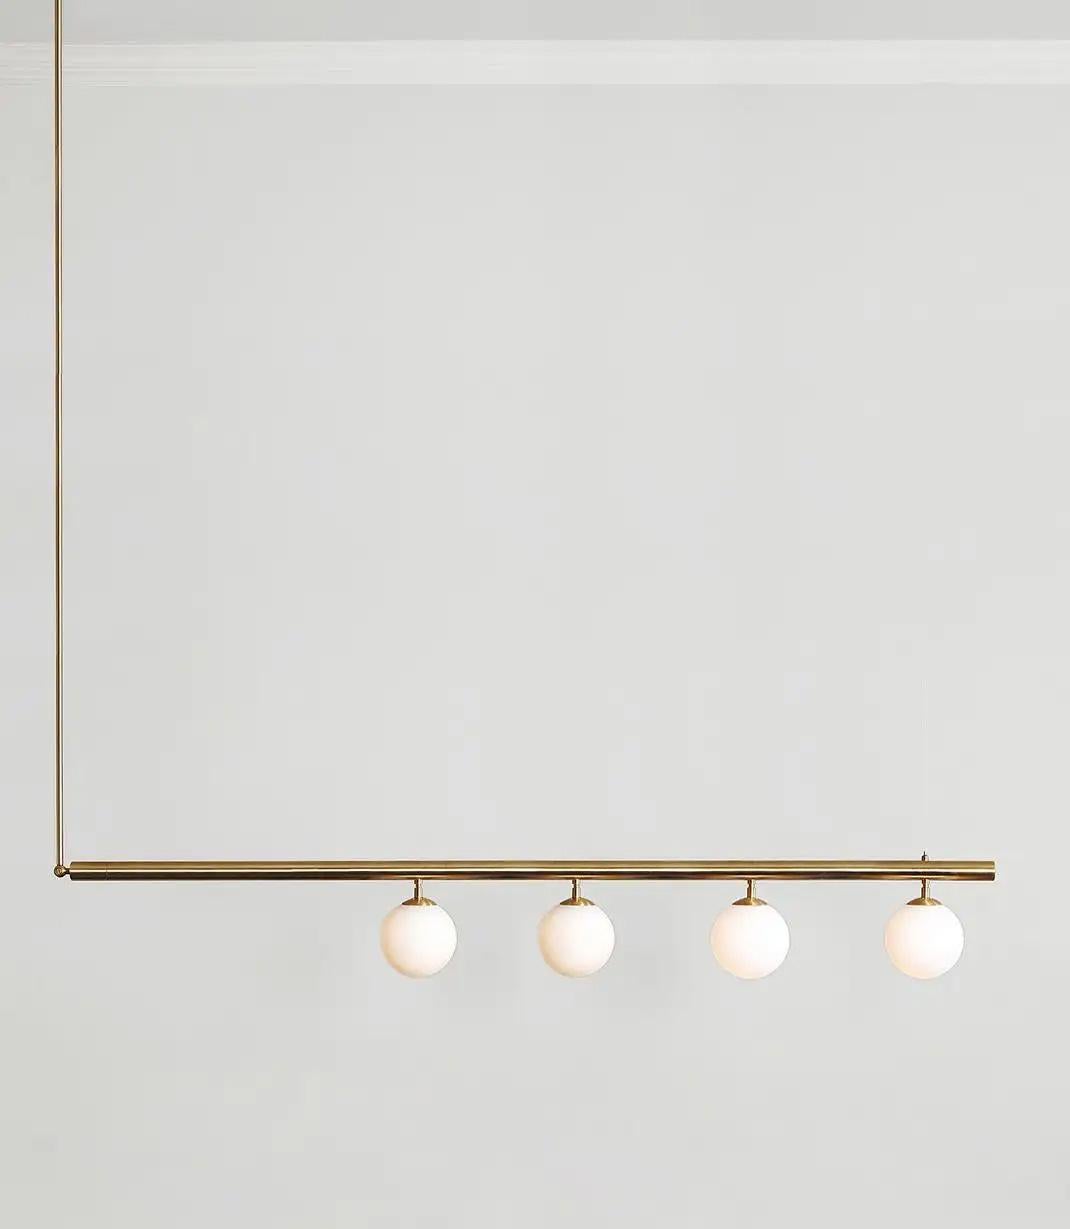 Contemporary Sculpted Brass Pendant, Satellite 4 by Paul Matter

Satellite is inspired by the conceptual and minimalist movement of the 1960s and 1970s. These light sculptures are fundamentally geometric and architectonic.
They rely on the cube as